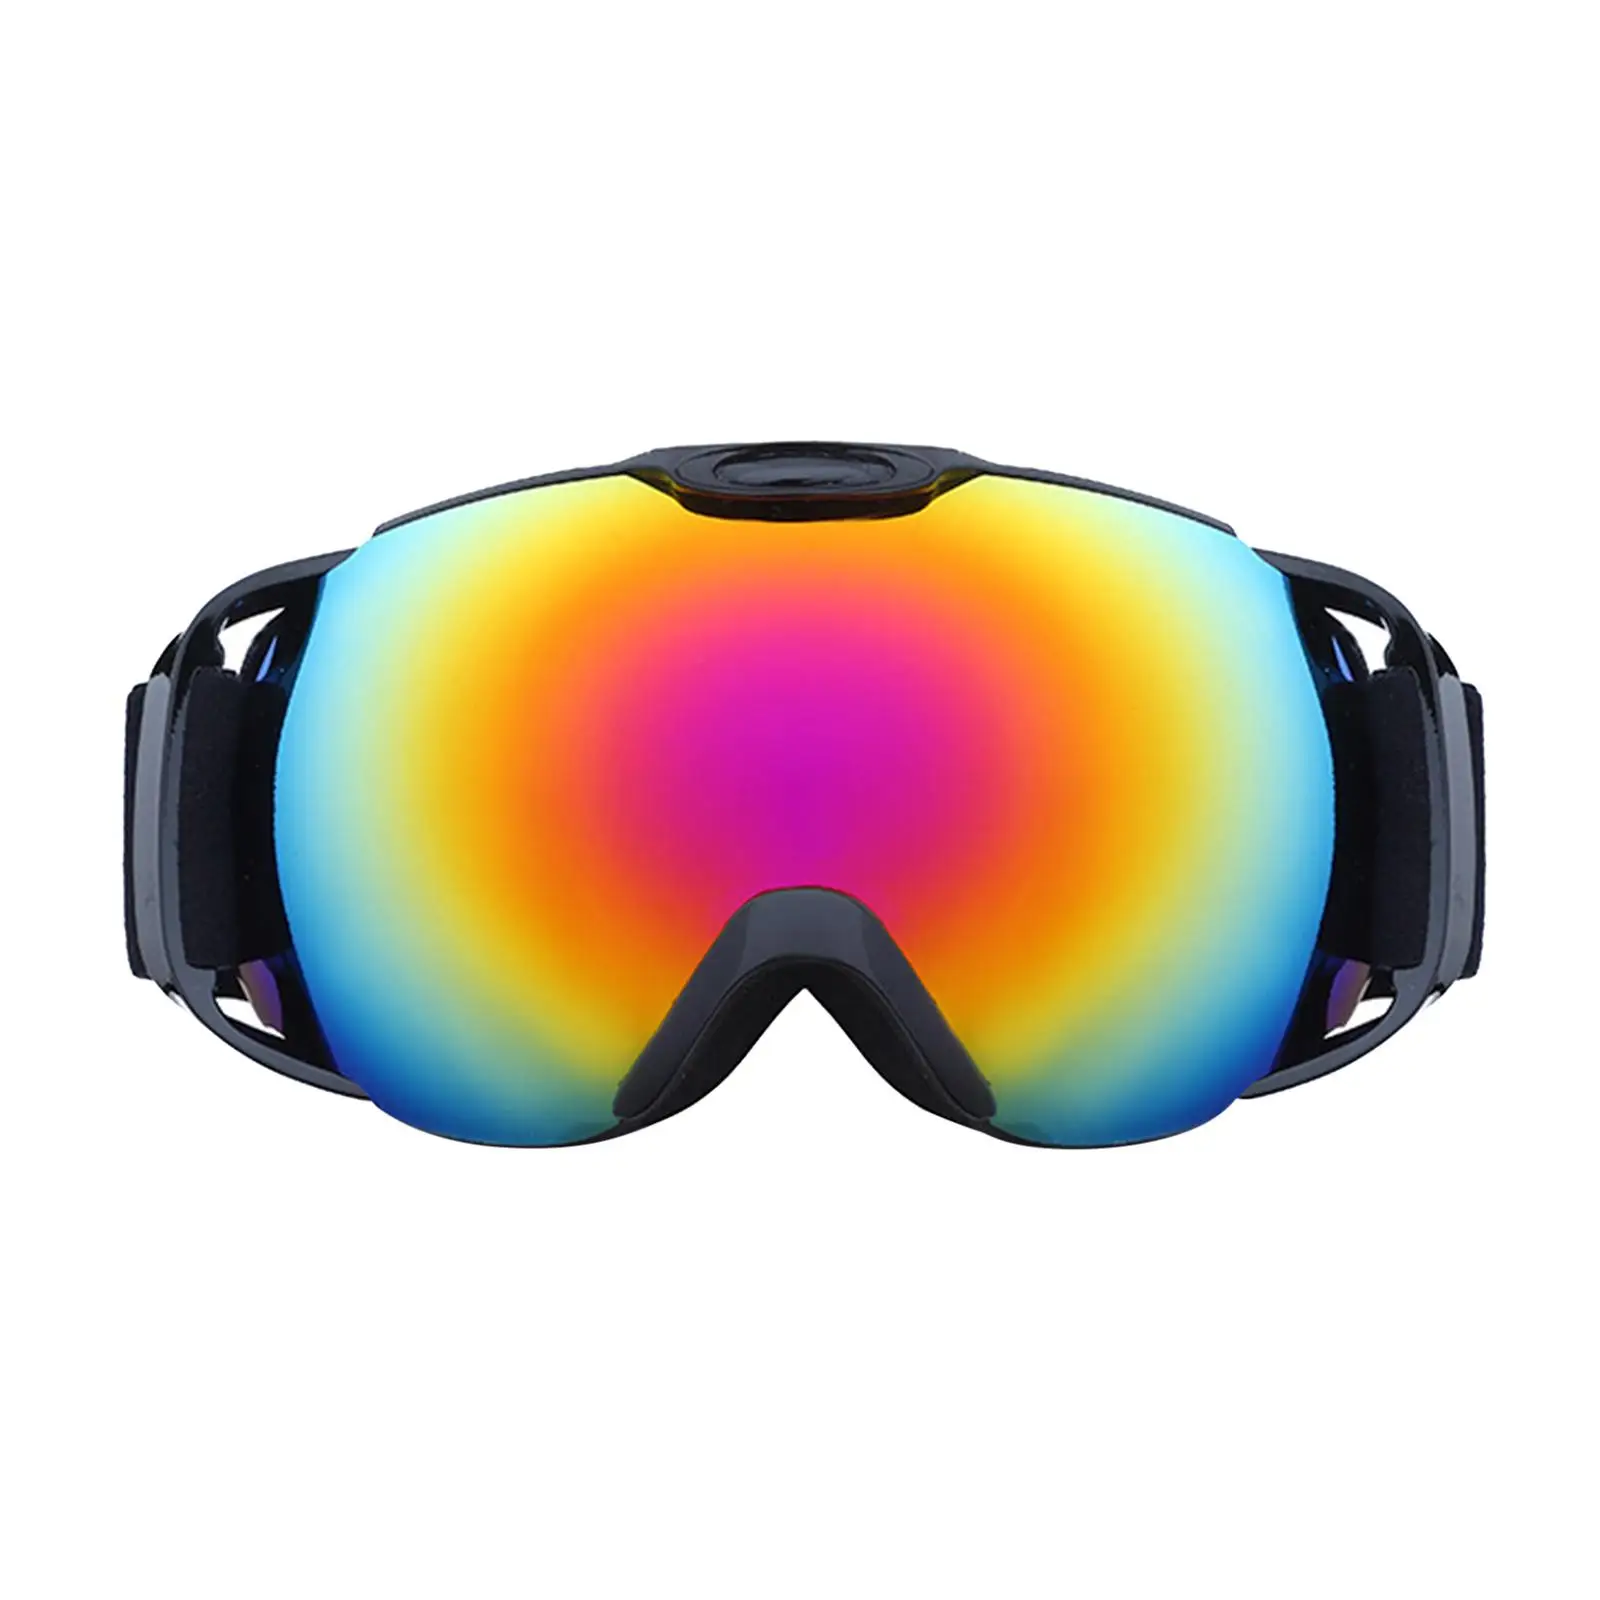 Windproof Ski Goggles Anti-Fog Skiing Snowboard Goggles UV Protection Eyewear for Motorcycle Snow Sports Adults Mountaineering